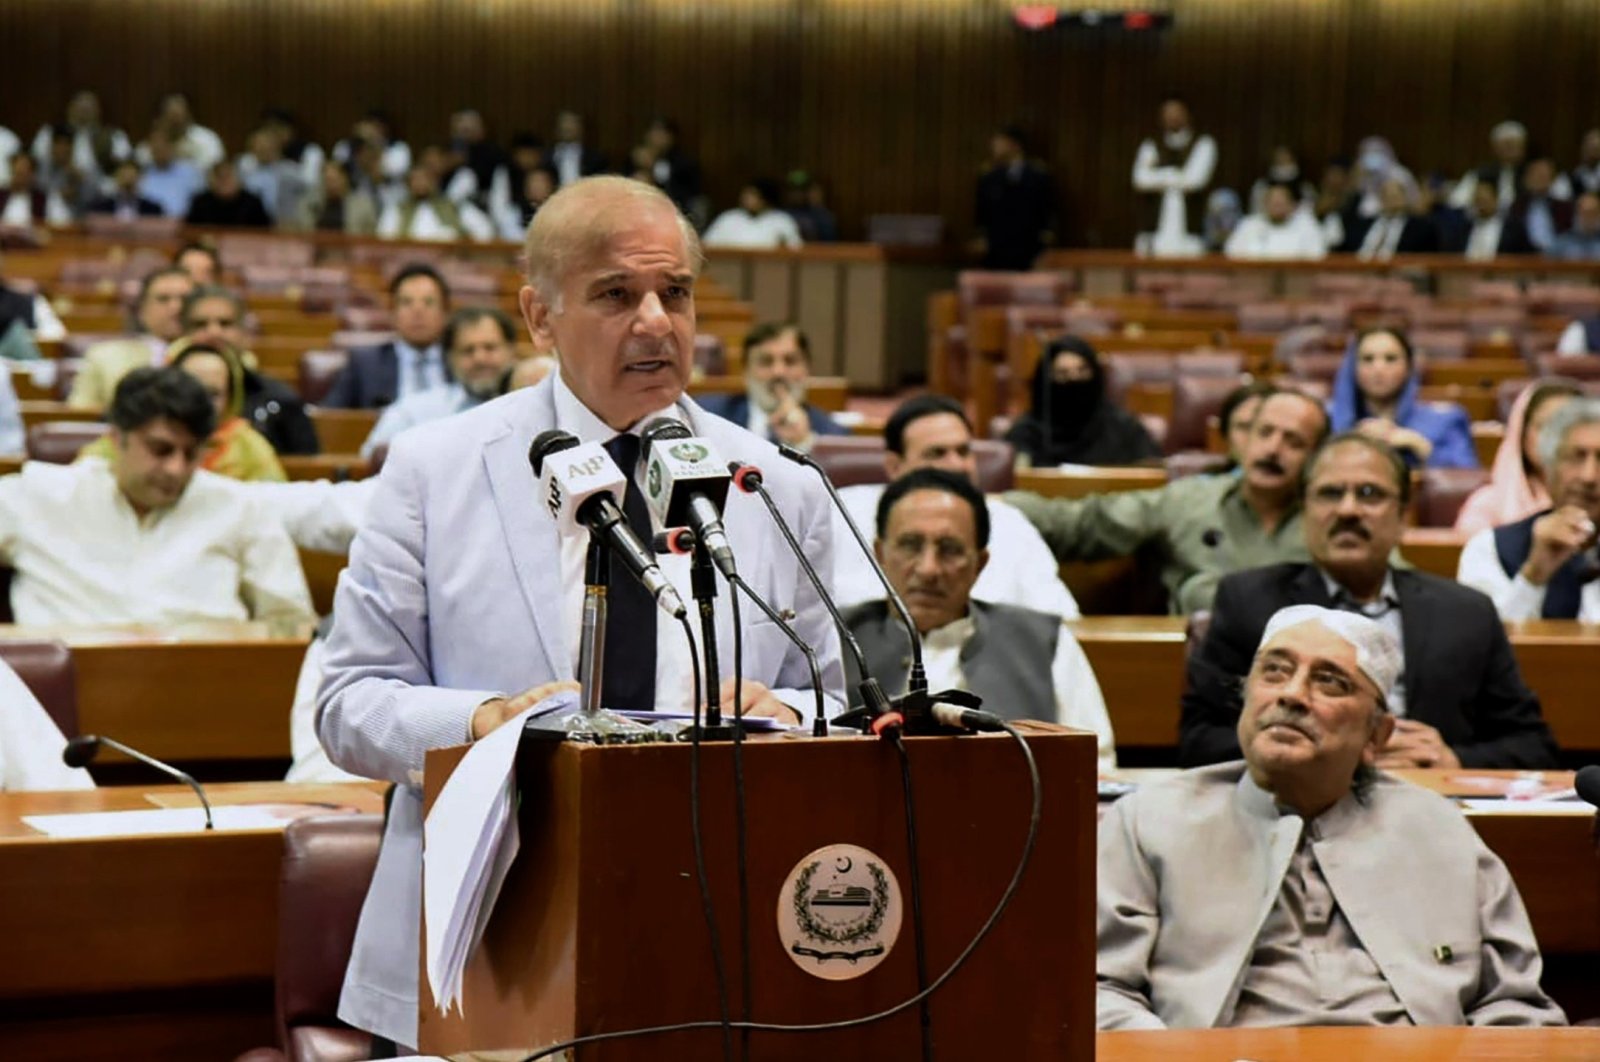 Pakistani Prime Minister Shahbaz Sharif addresses the National Assembly in Islamabad, Pakistan, April 11, 2022. (AP Photo)